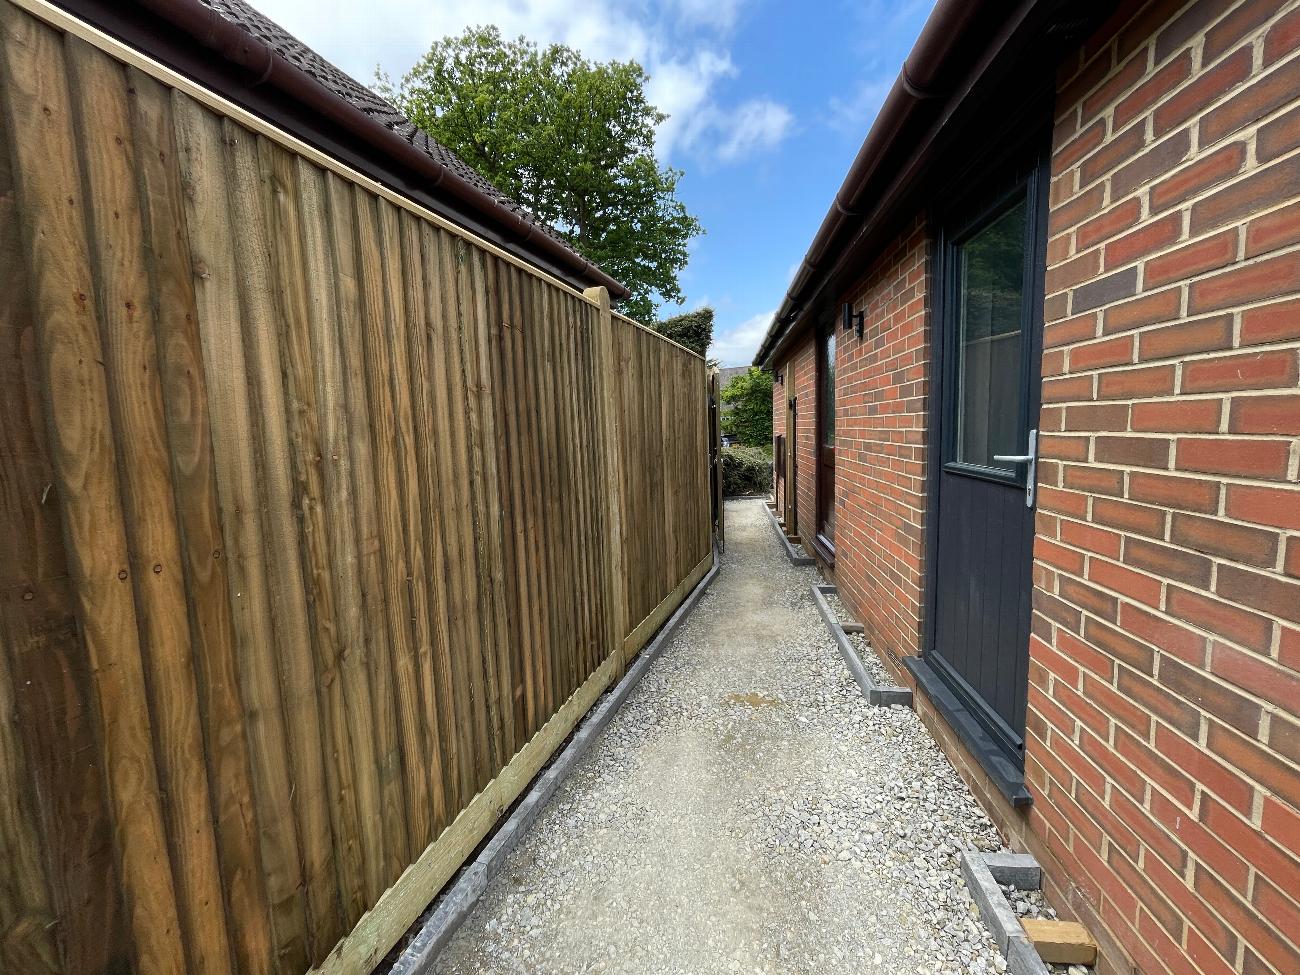 Additional Services | DGR Surfaces | Resin Driveways in Kent gallery image 12